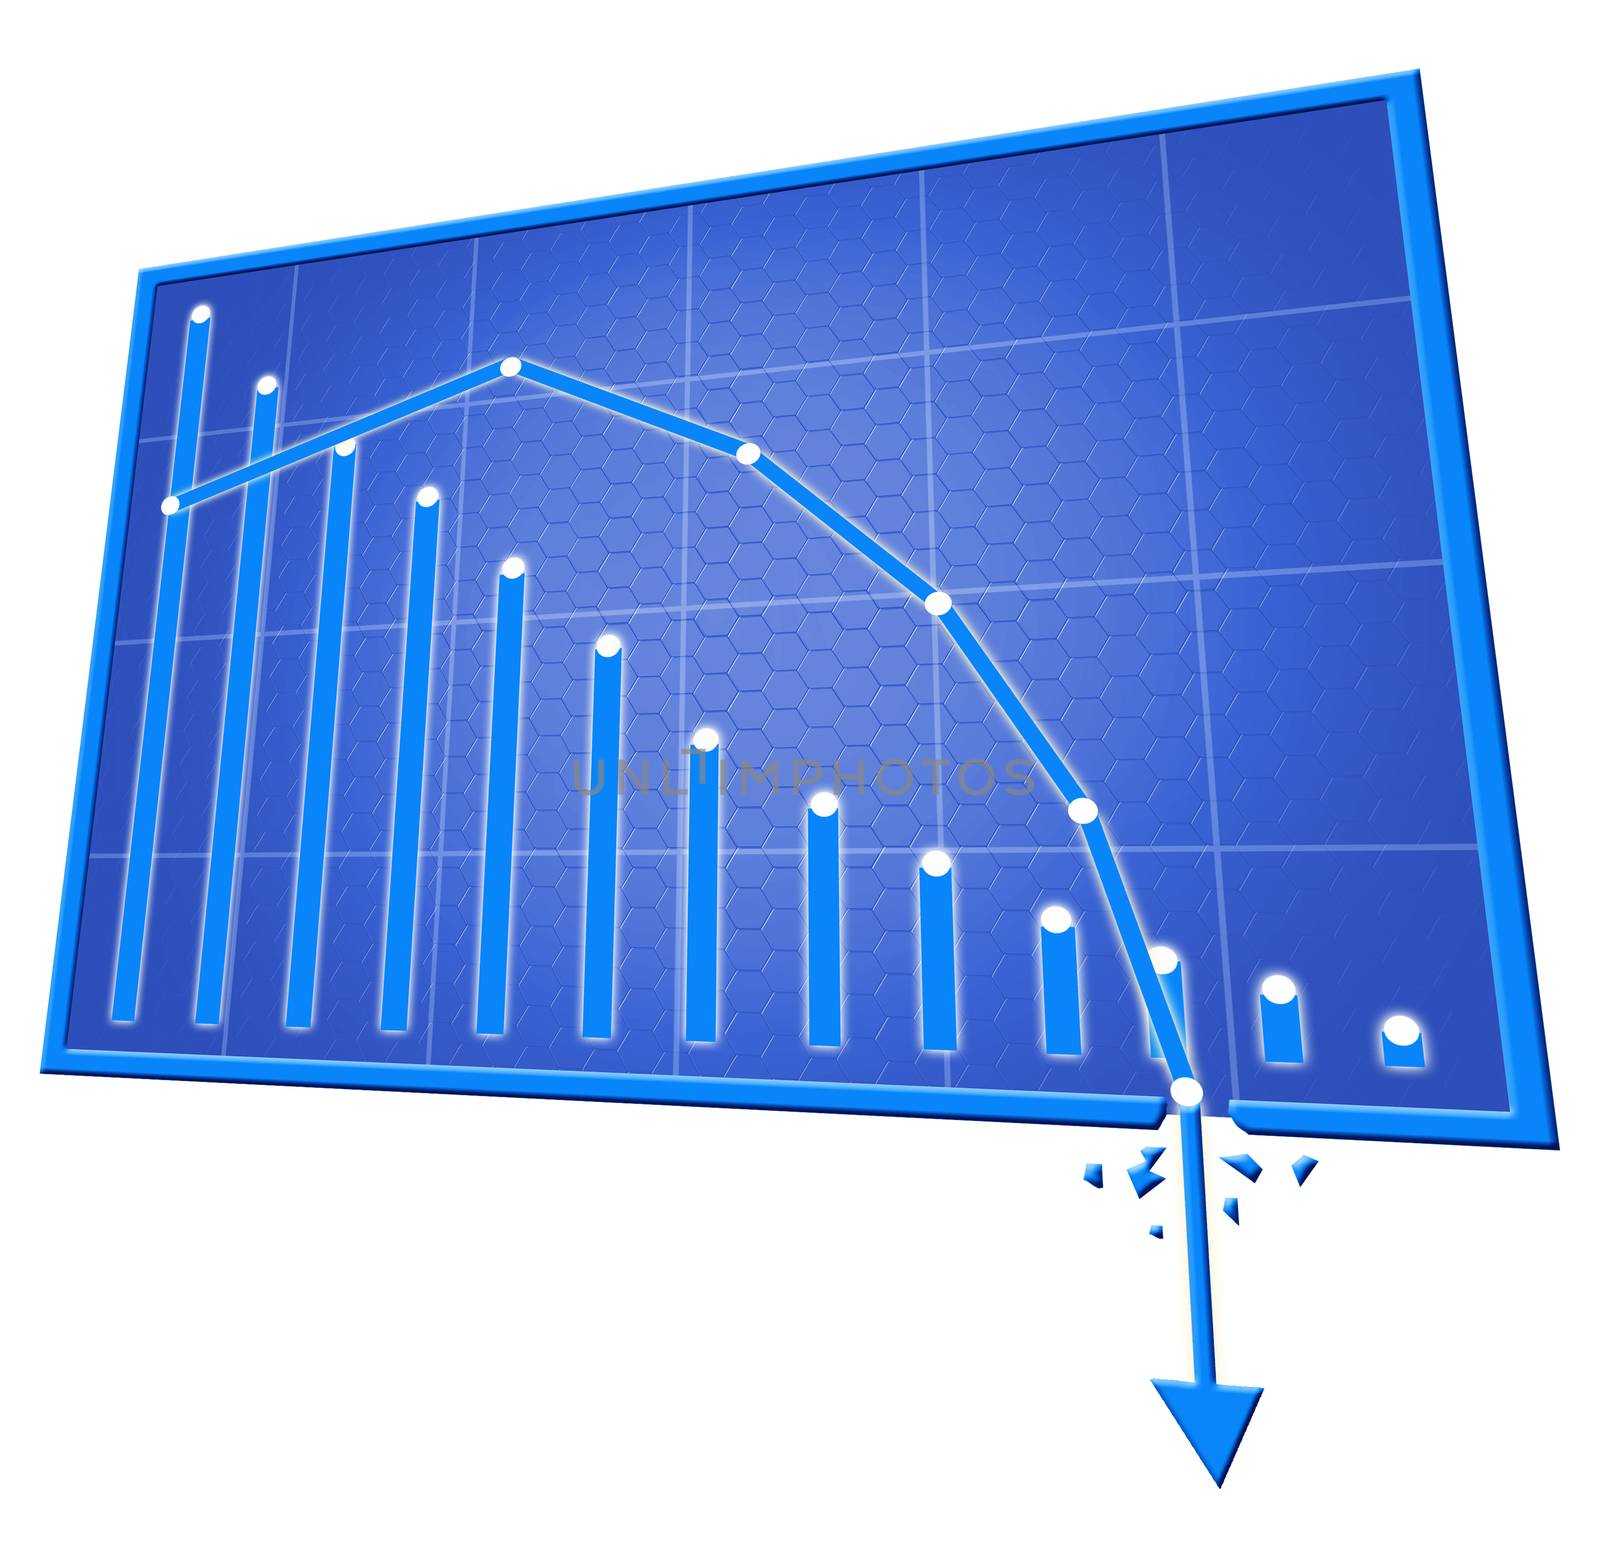 blue bad graph isolated on withe background